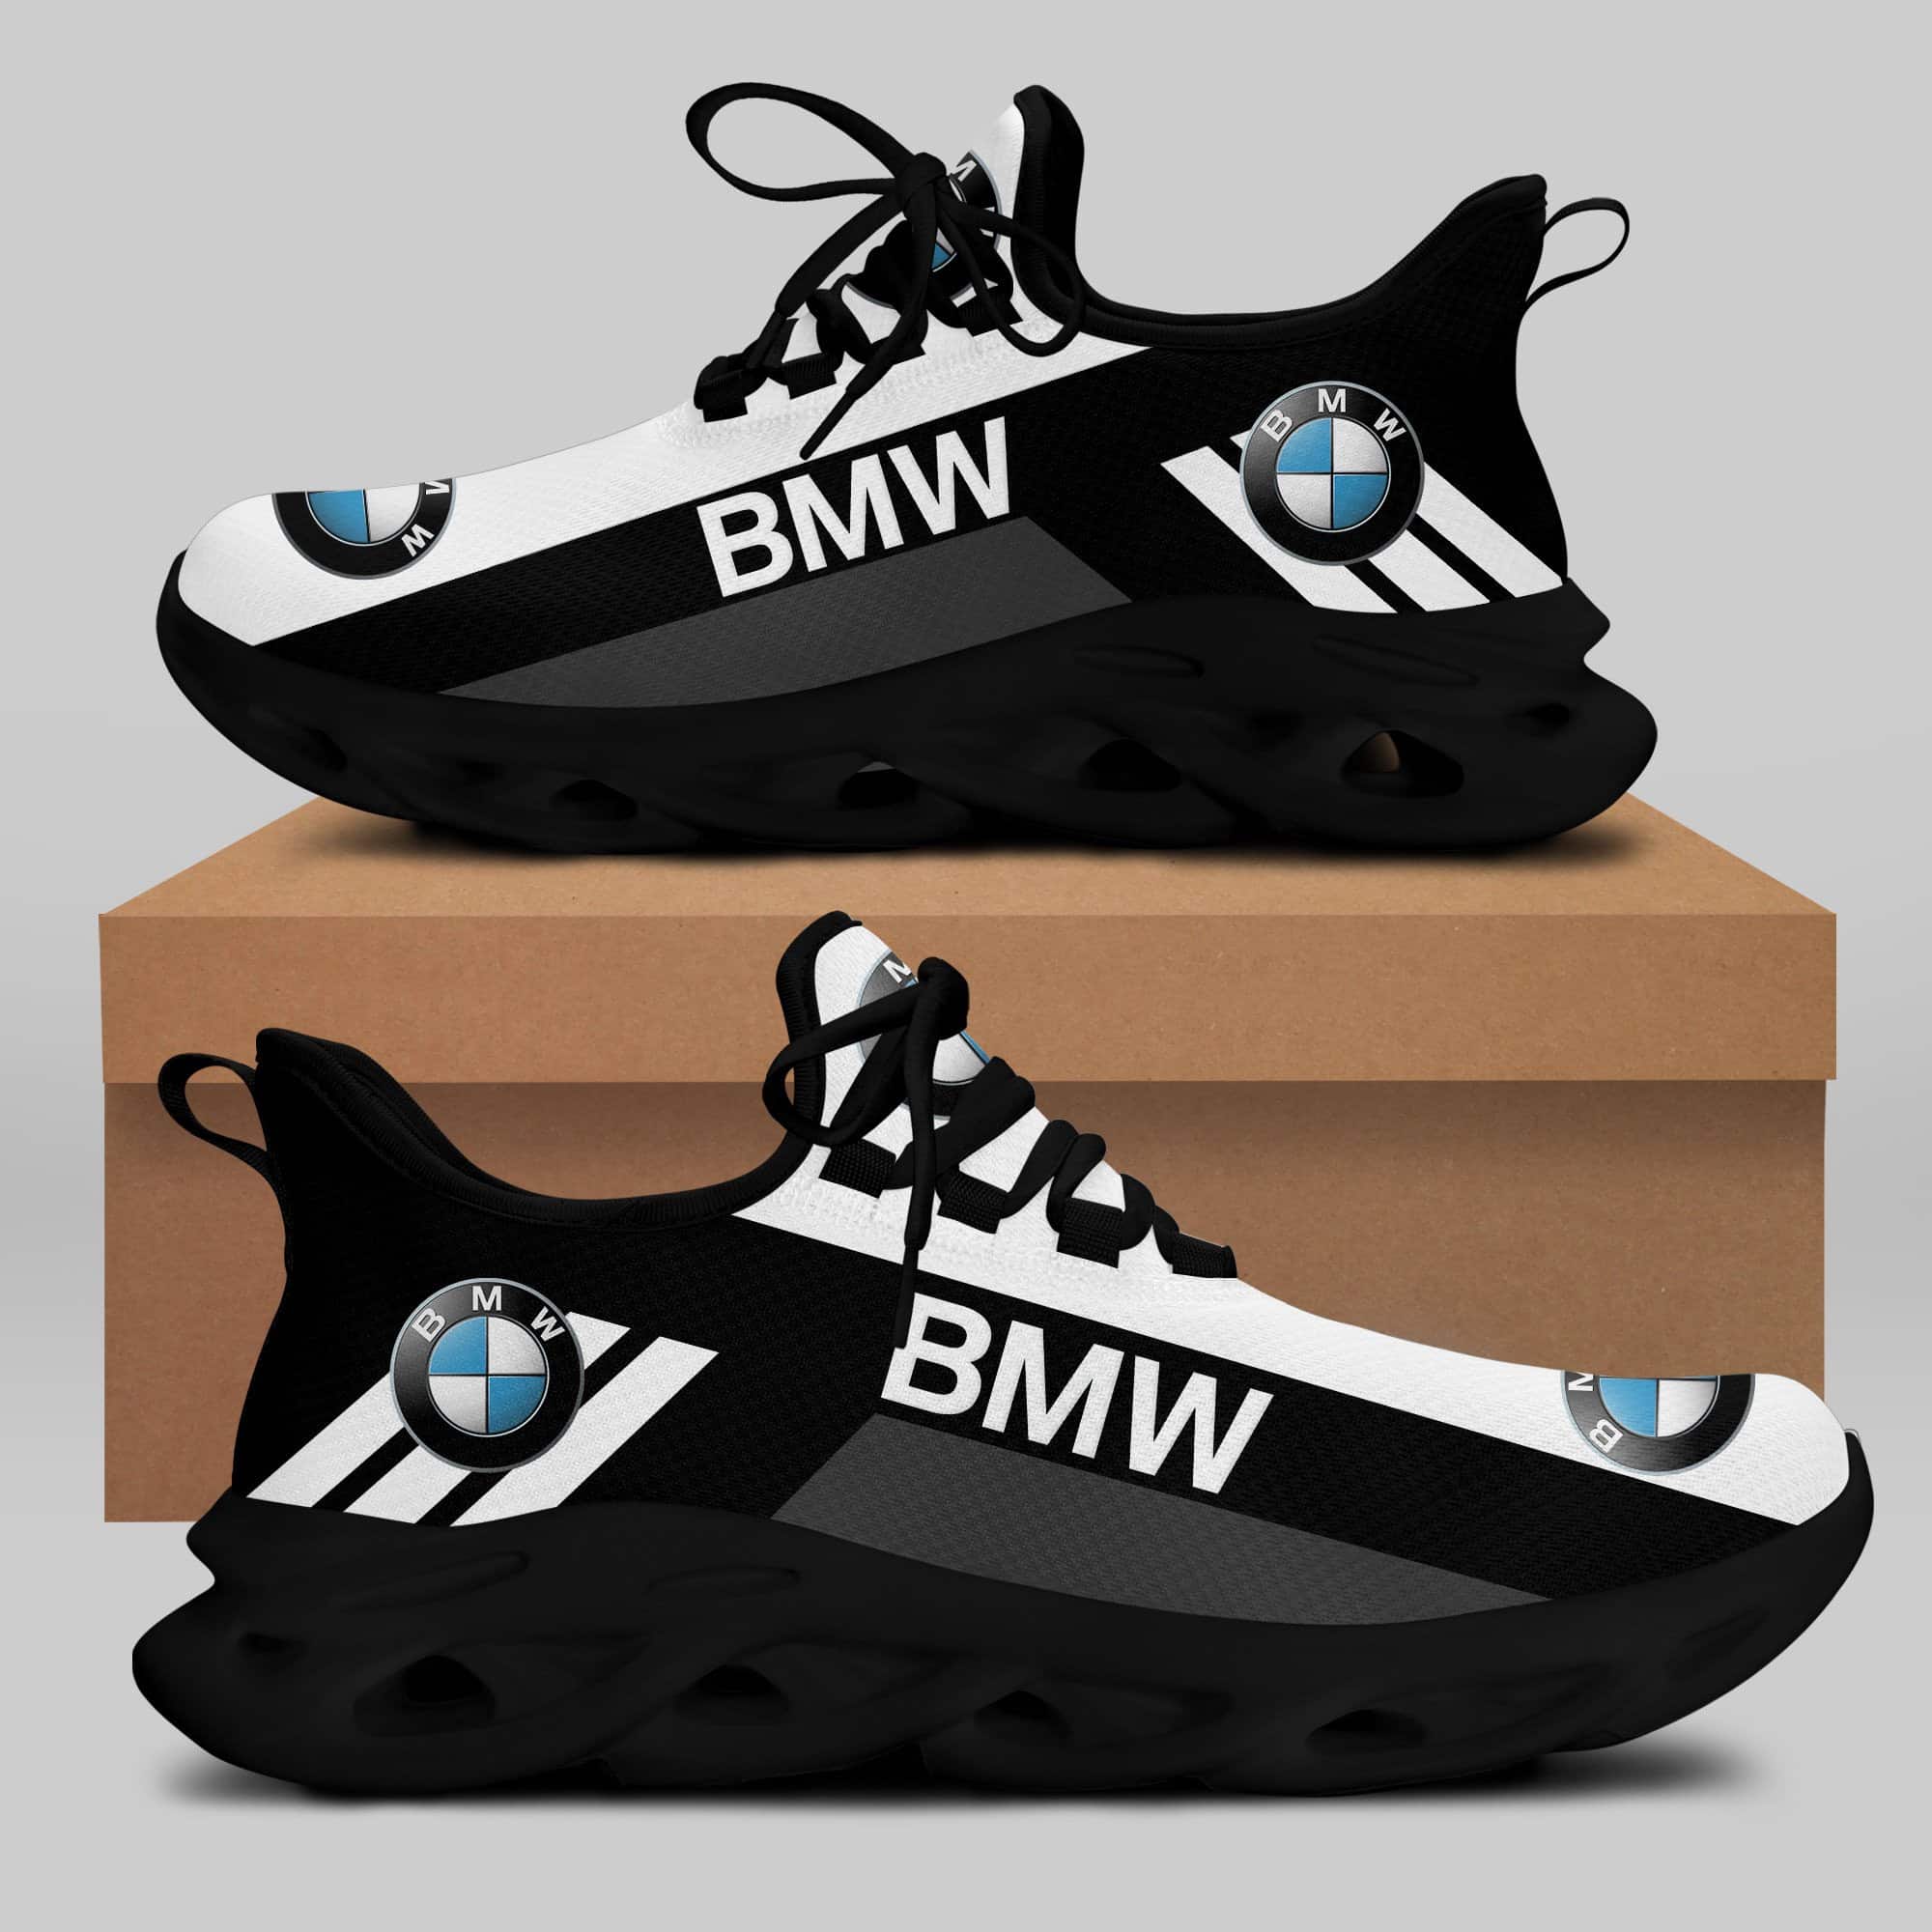 Bmw Running Shoes Max Soul Shoes Sneakers Ver 24 2